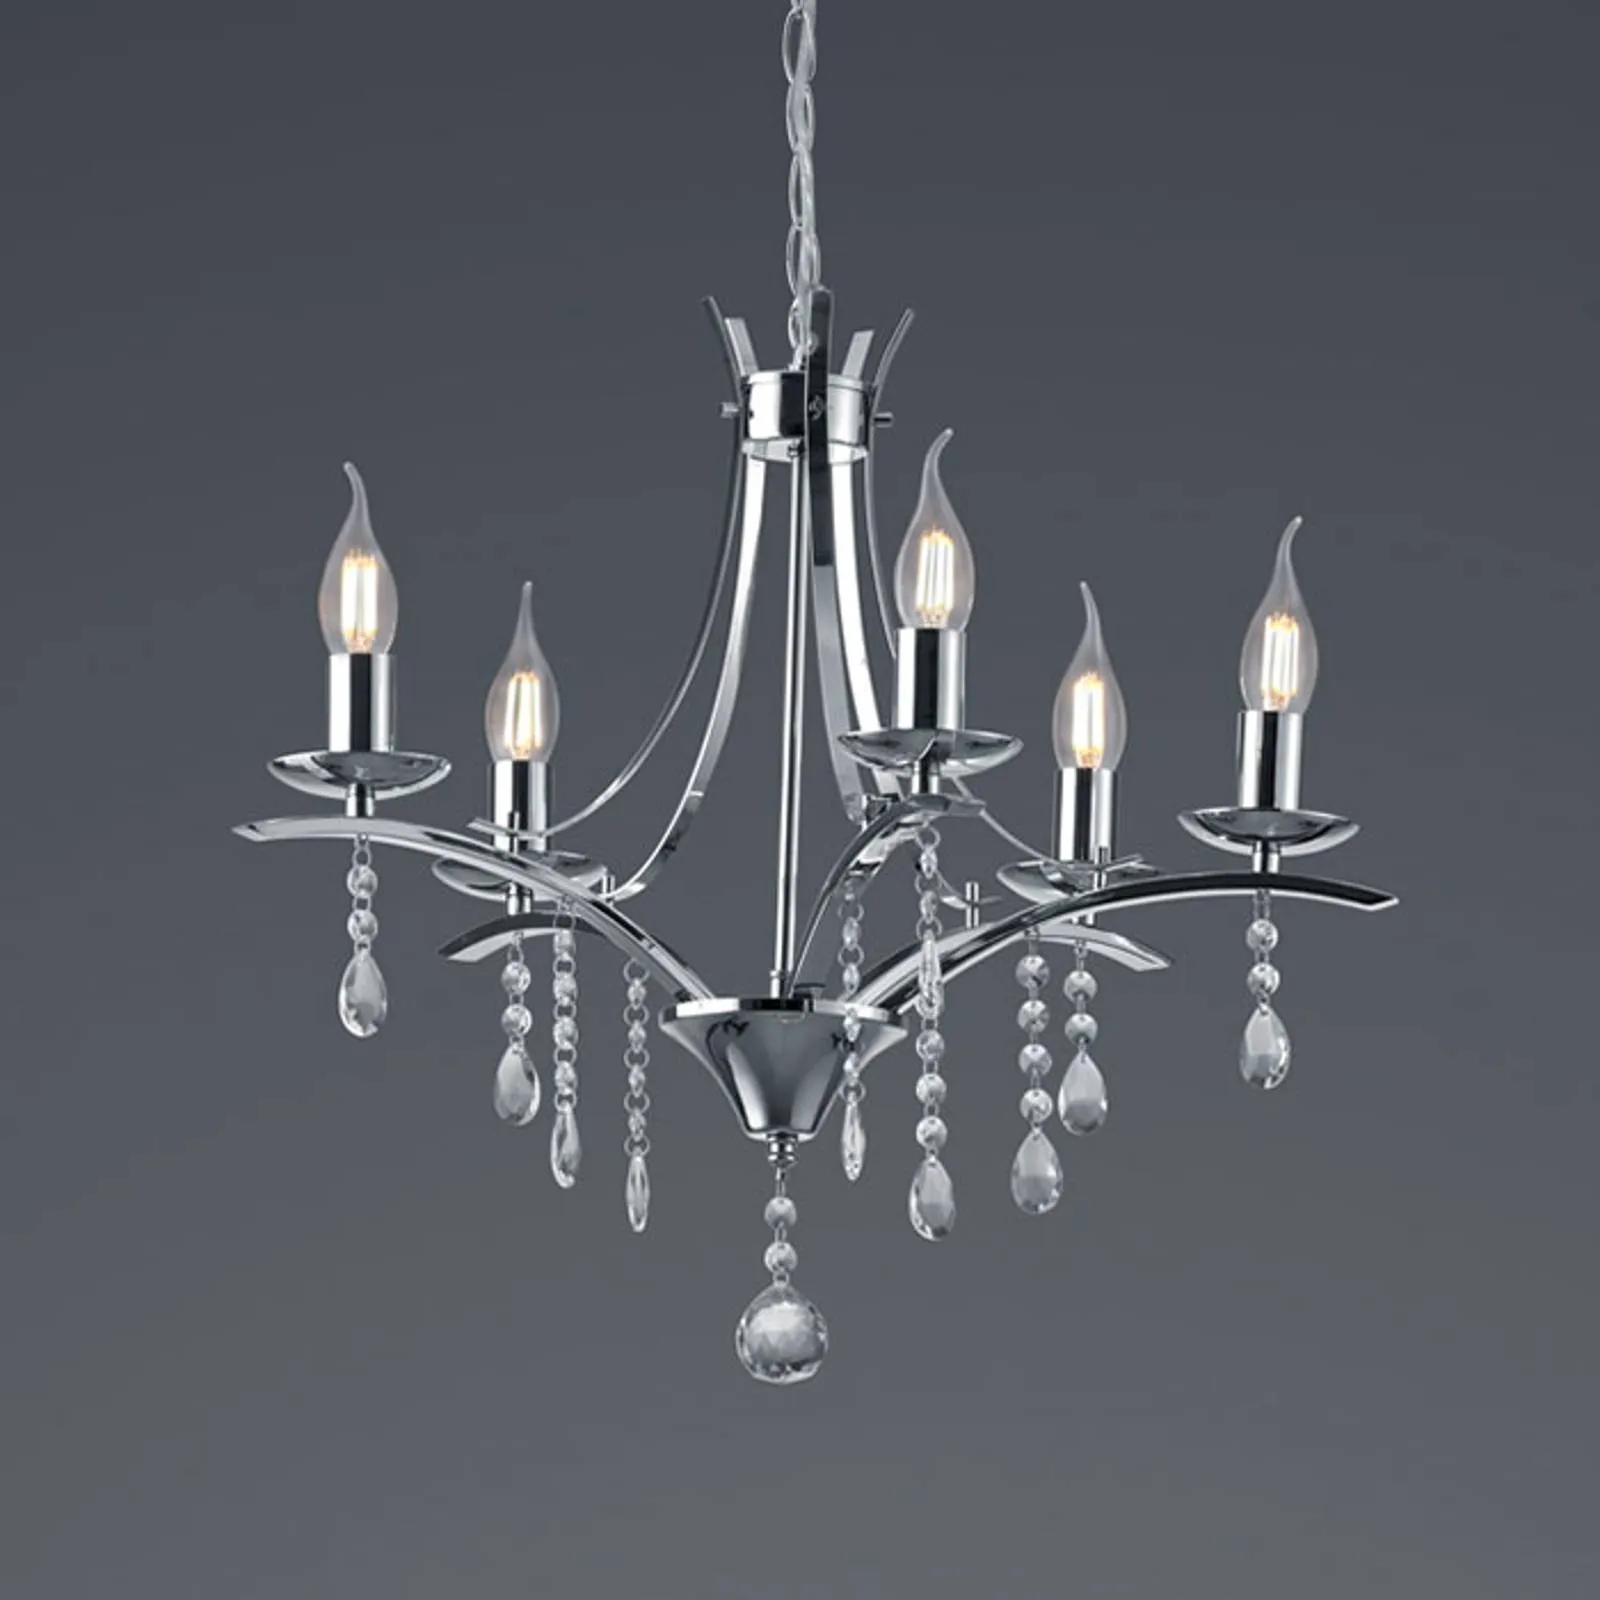 Lucerna chandelier with glass elements, five-bulb